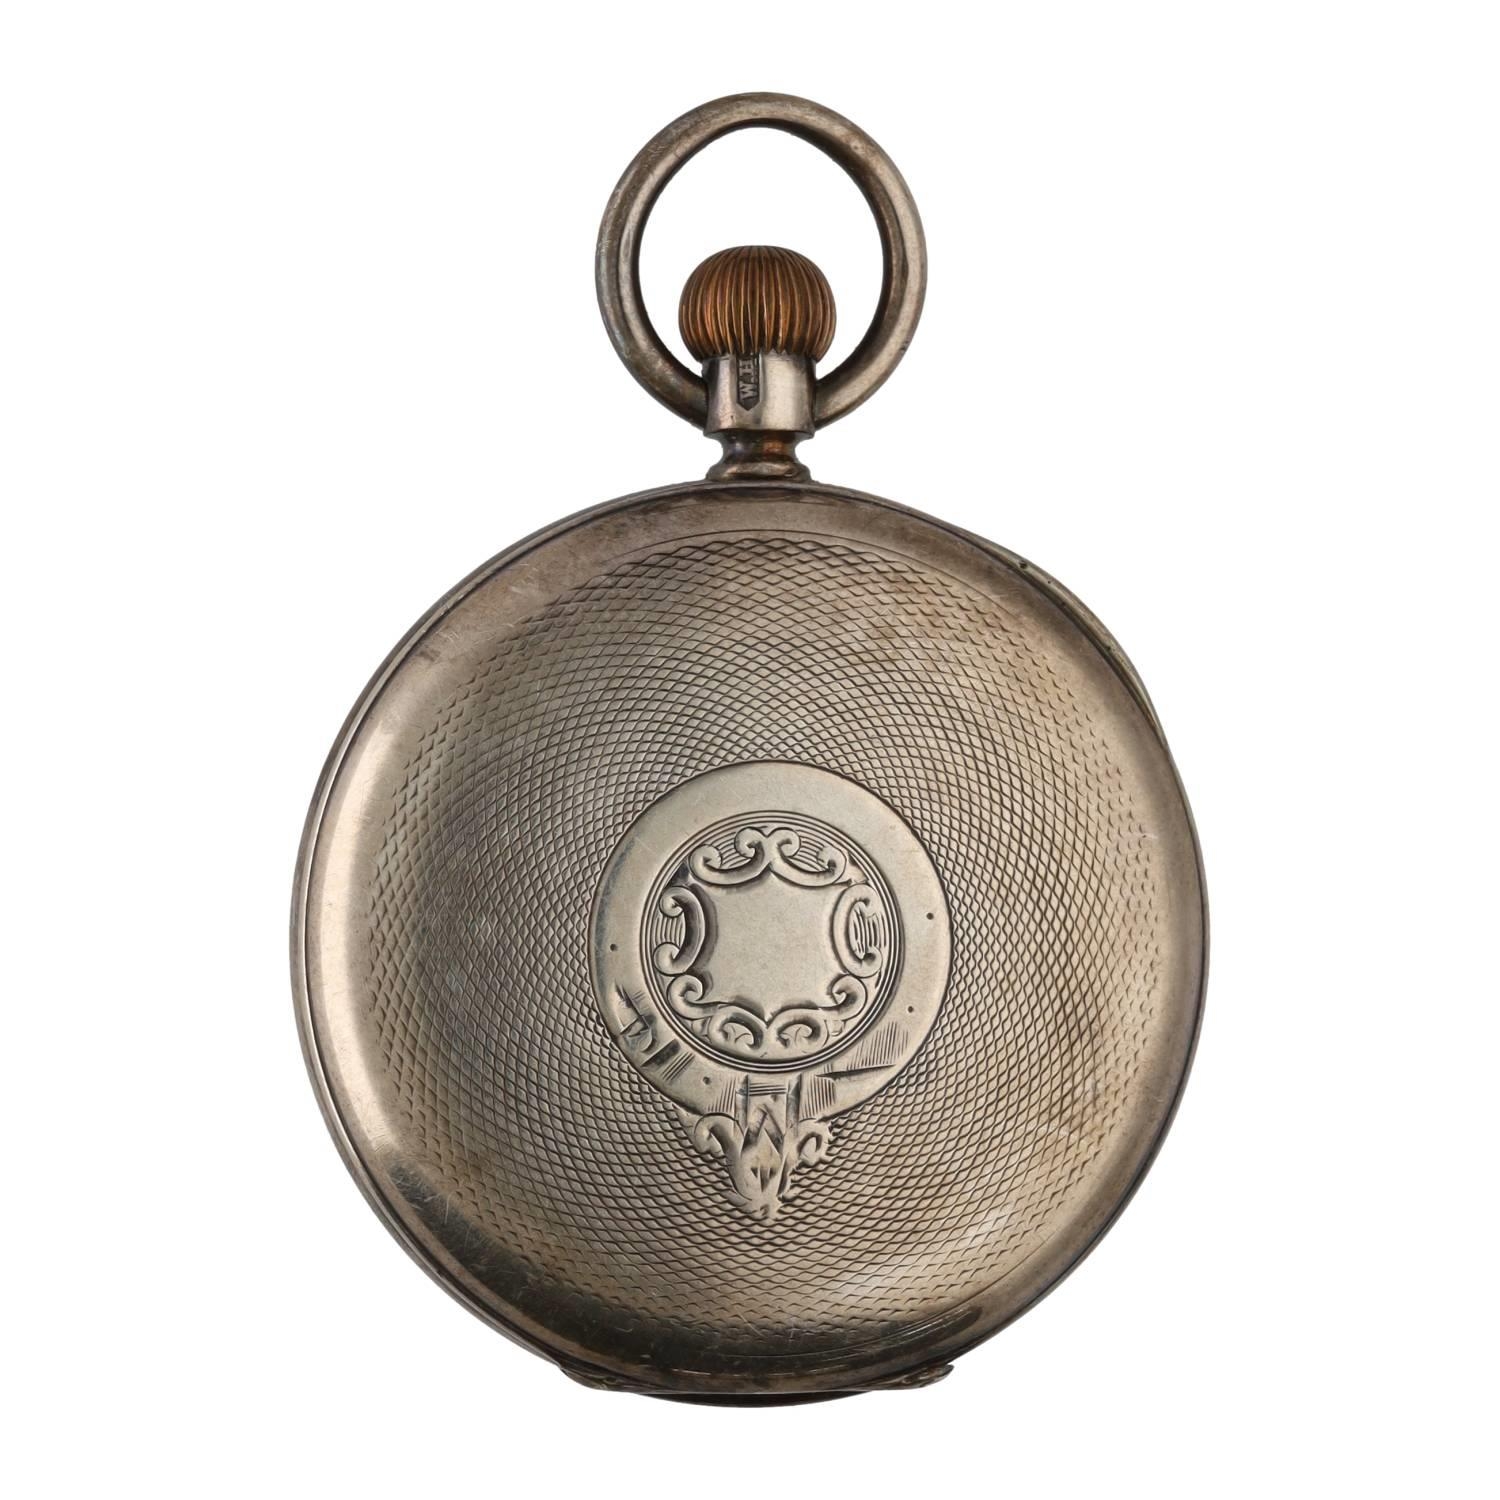 American Waltham 'Royal' silver lever pocket watch, circa 1907, serial no. 16179970, signed 17 jewel - Image 4 of 4